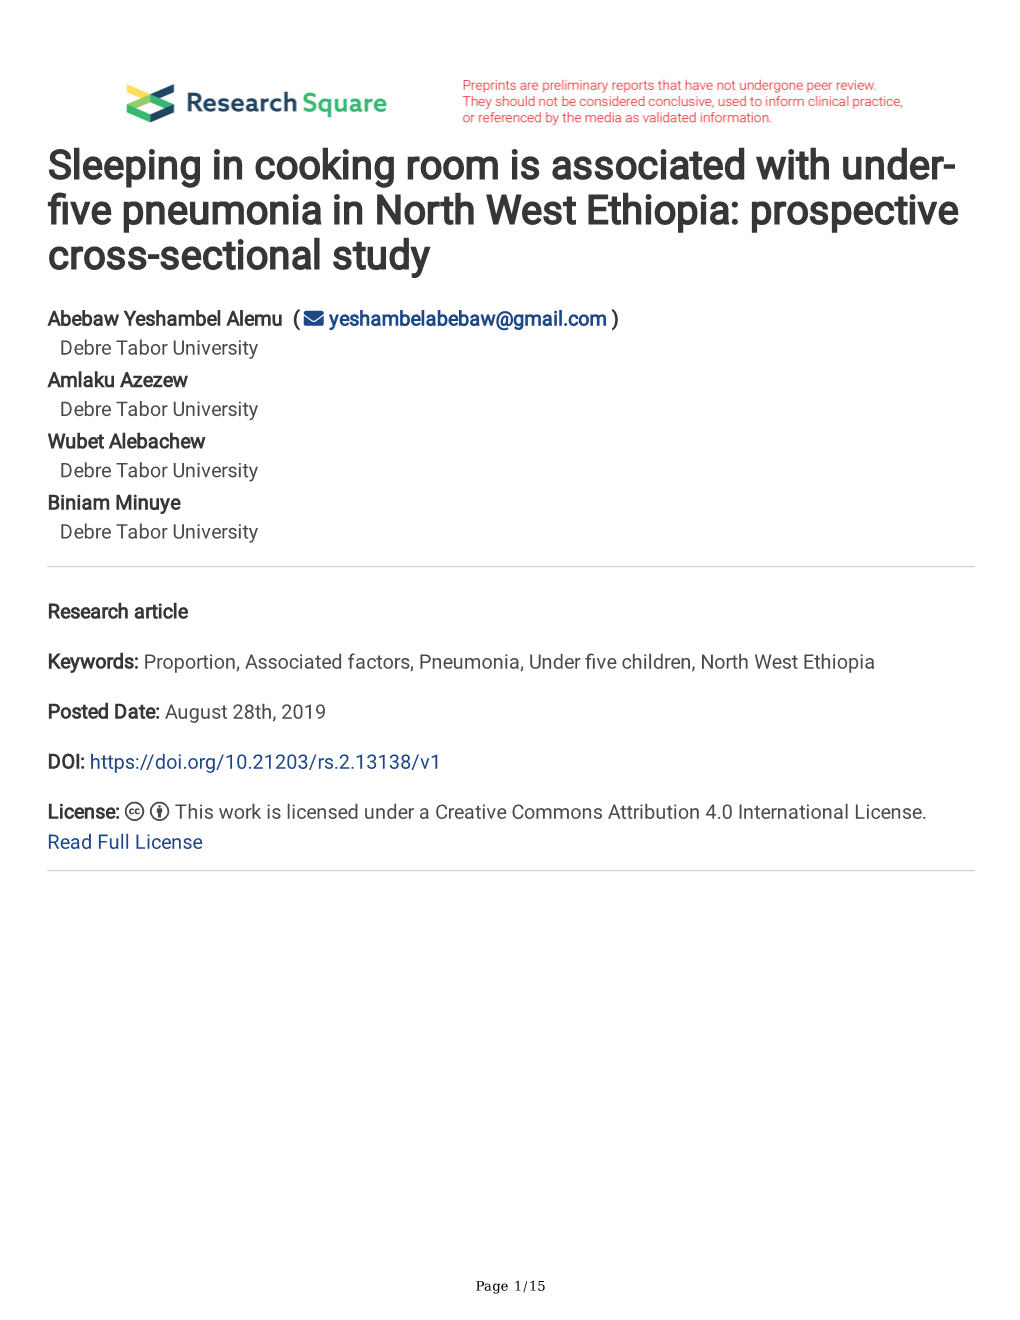 Sleeping in Cooking Room Is Associated with Under- Fve Pneumonia in North West Ethiopia: Prospective Cross-Sectional Study